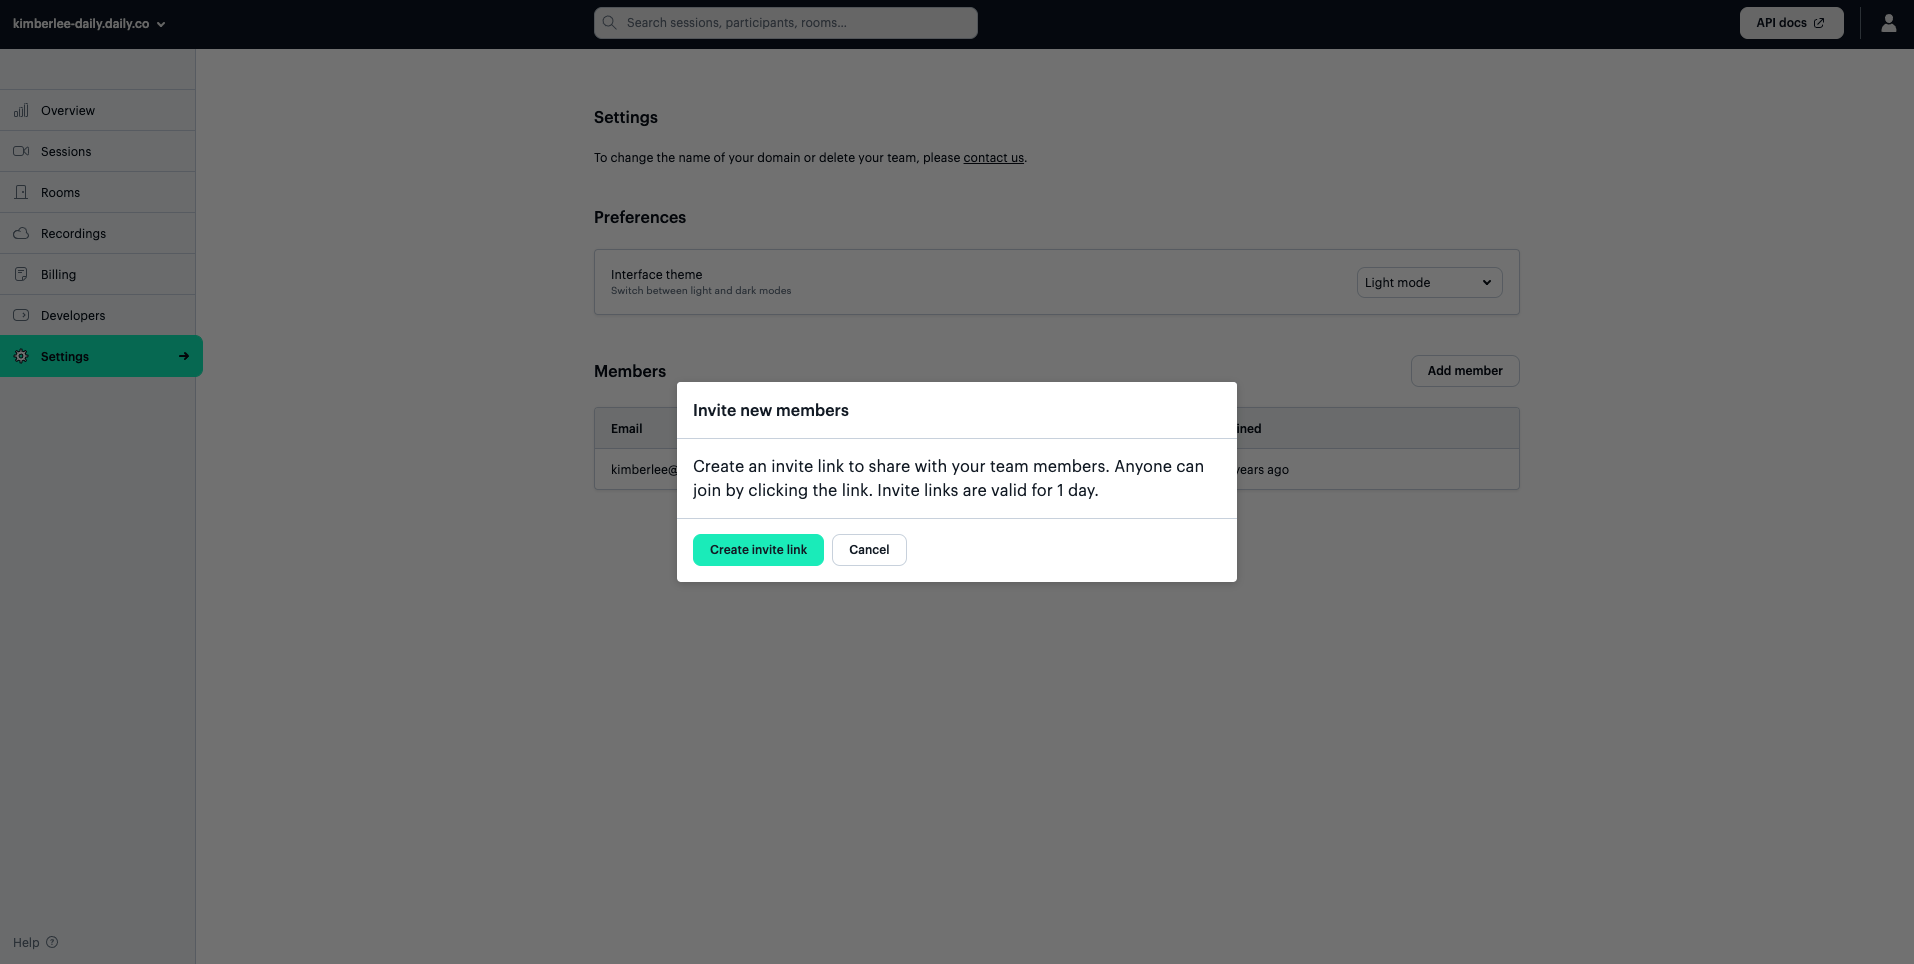 Modal in the Daily dashboard prompts viewer to copy link to invite new members